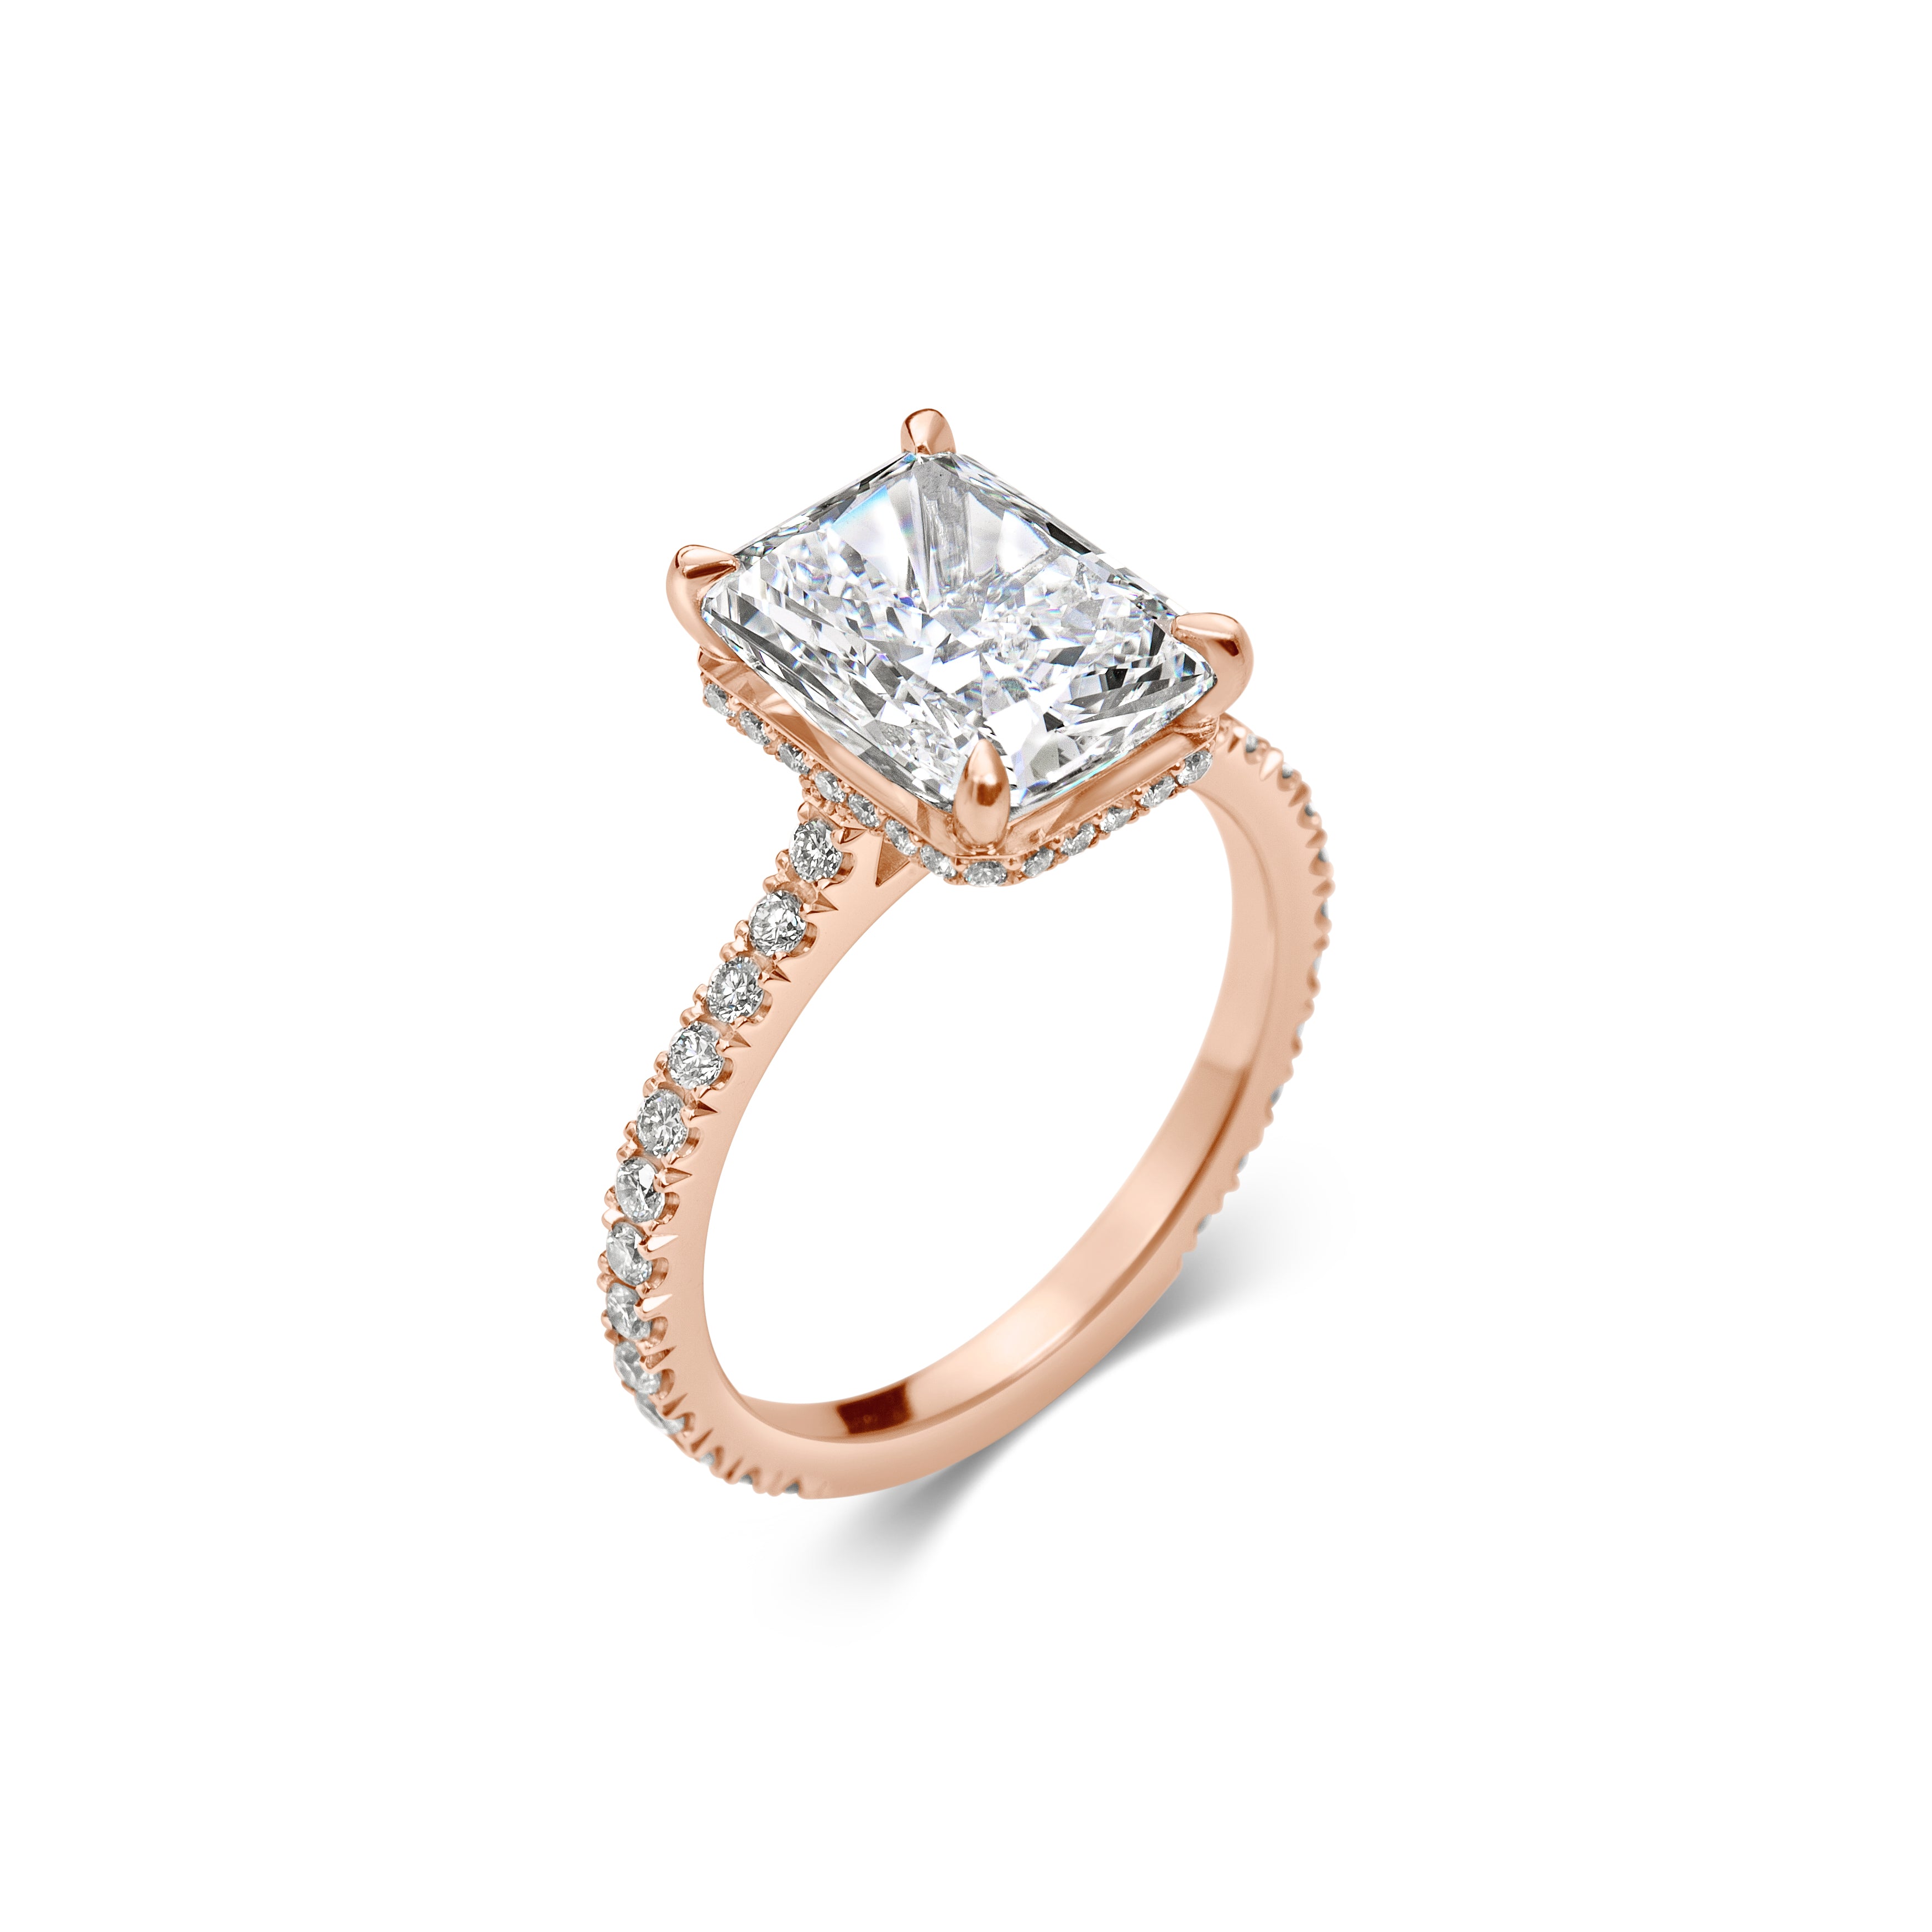 LOULOU radiant cut rose gold